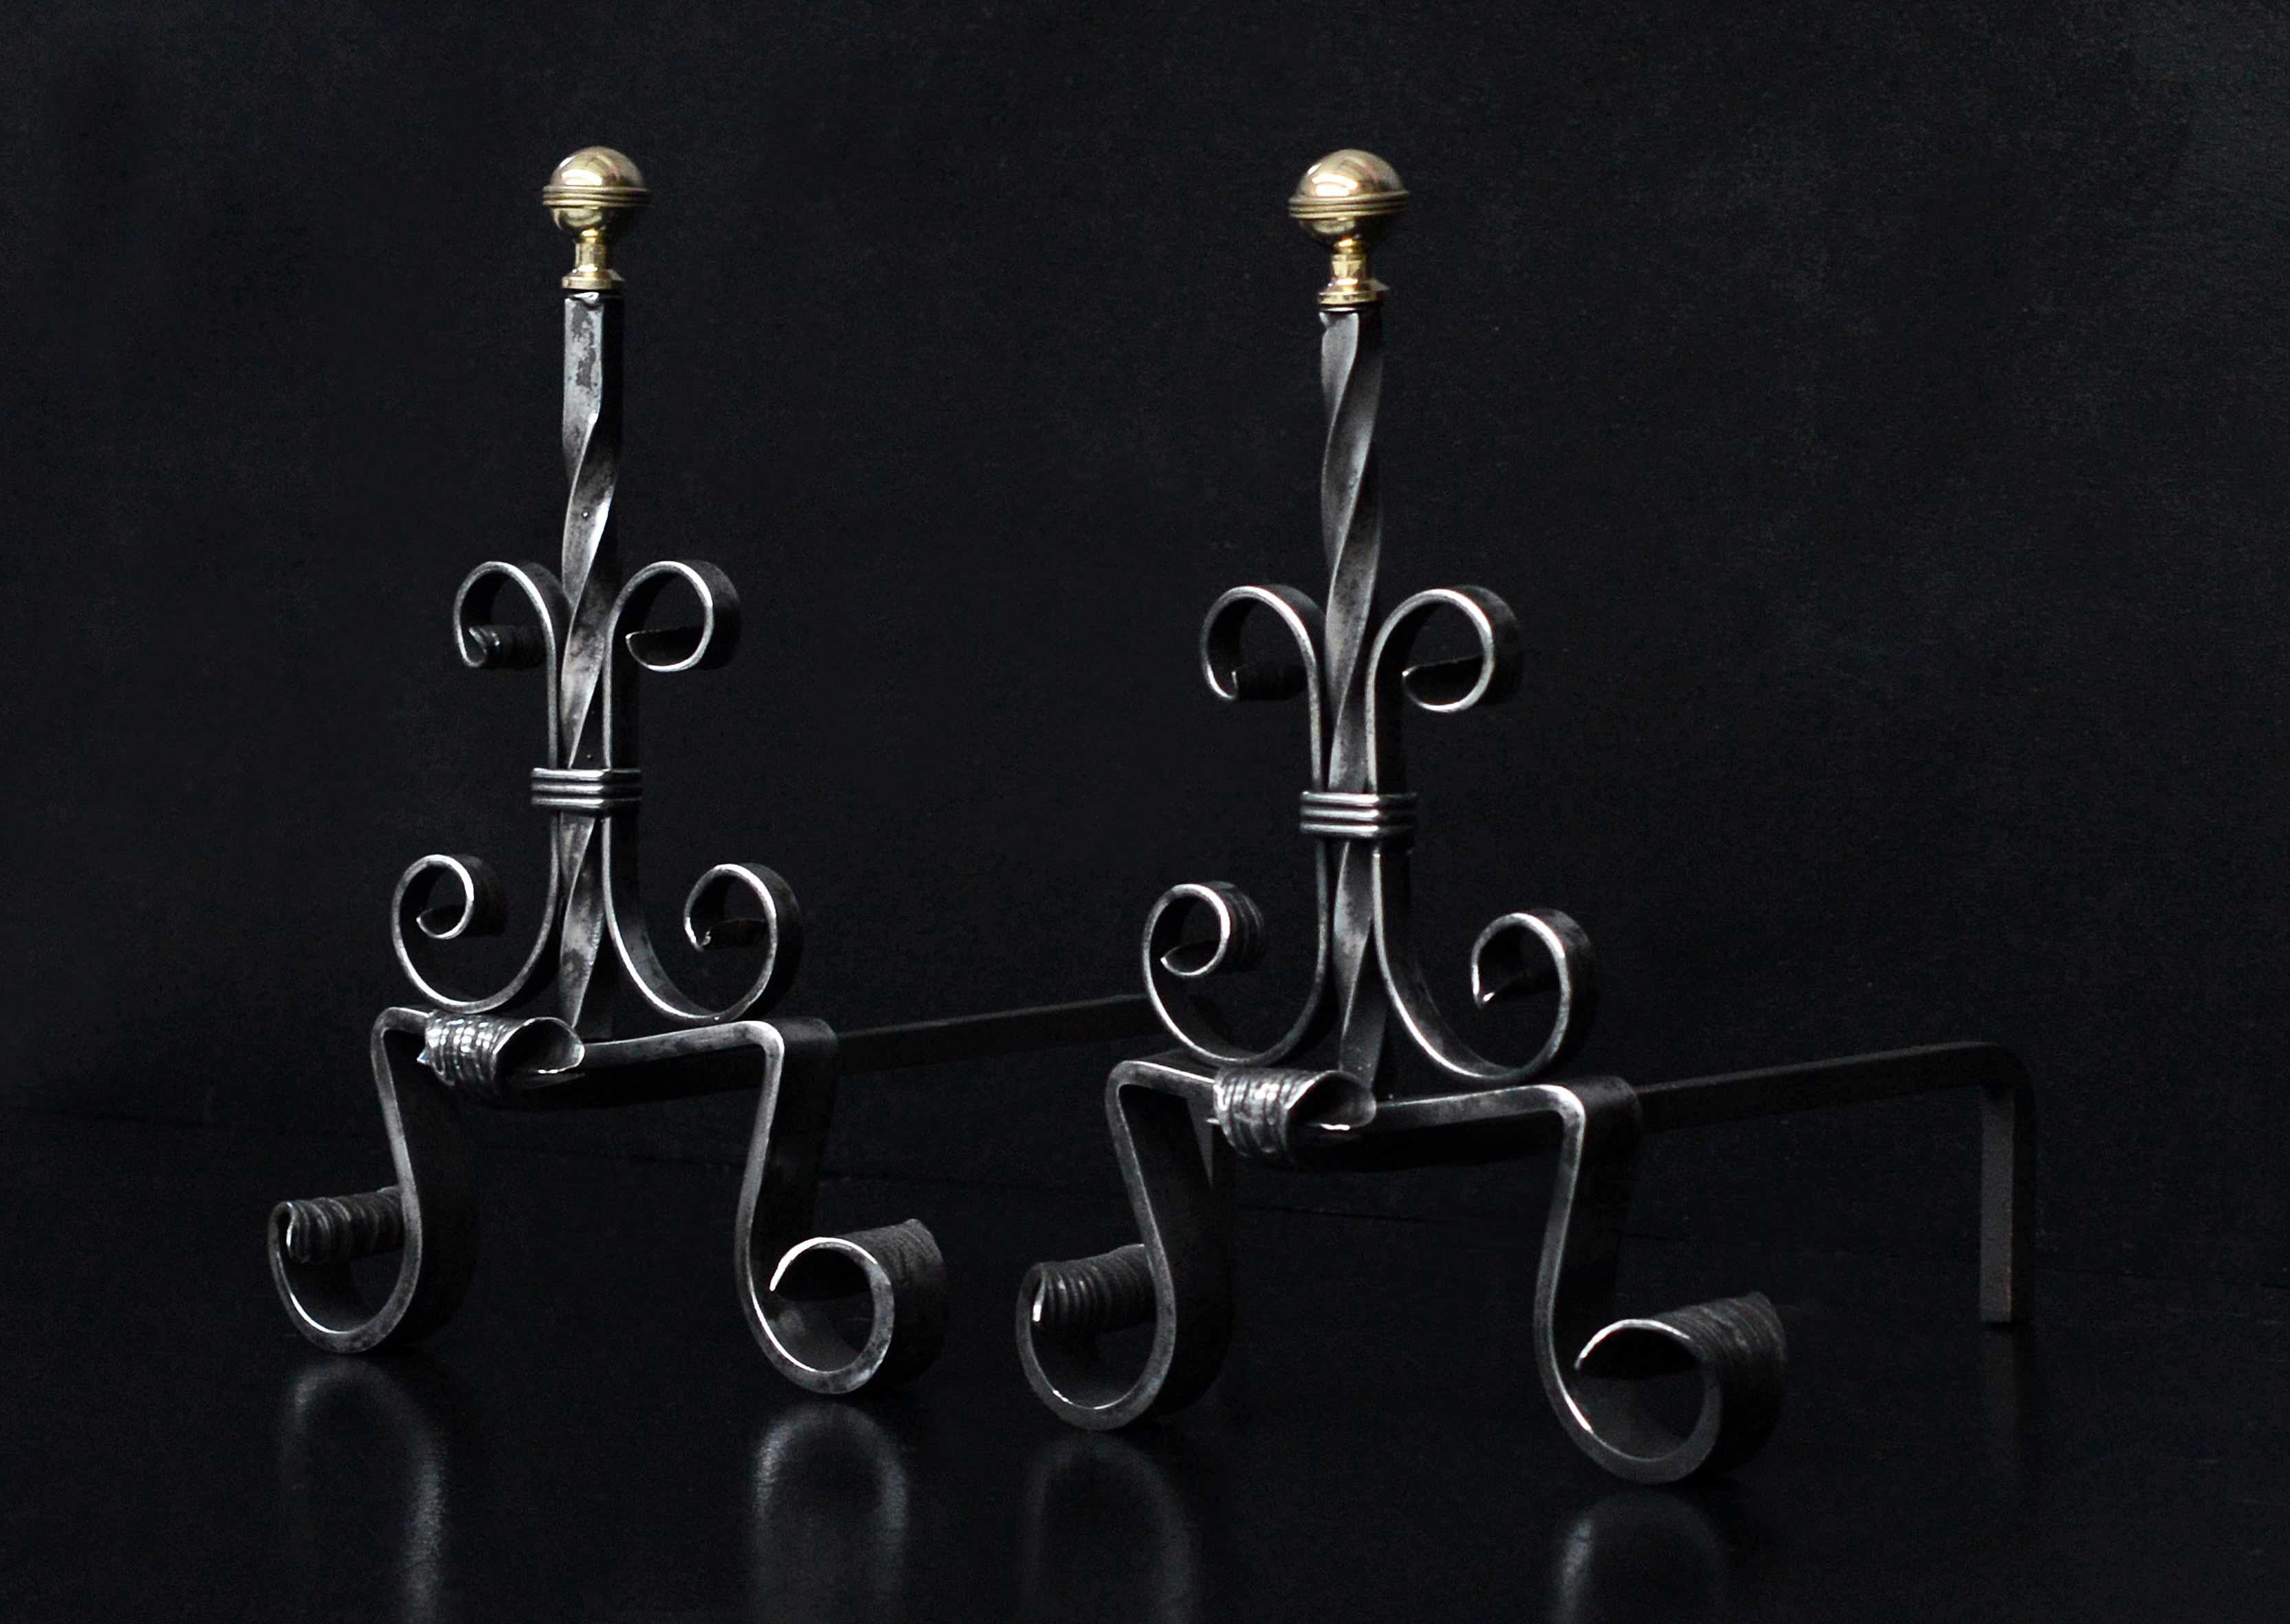 A pair of polished steel firedogs. The scrolled feet surmounted by barley twist shafts and scroll work, with brass ball finials to top. French, 19th century.

Measurements:
Height: 415 mm 16 3/8 in
Width: 300 mm 11 3/4 in
Depth: 395 mm 15 1/2